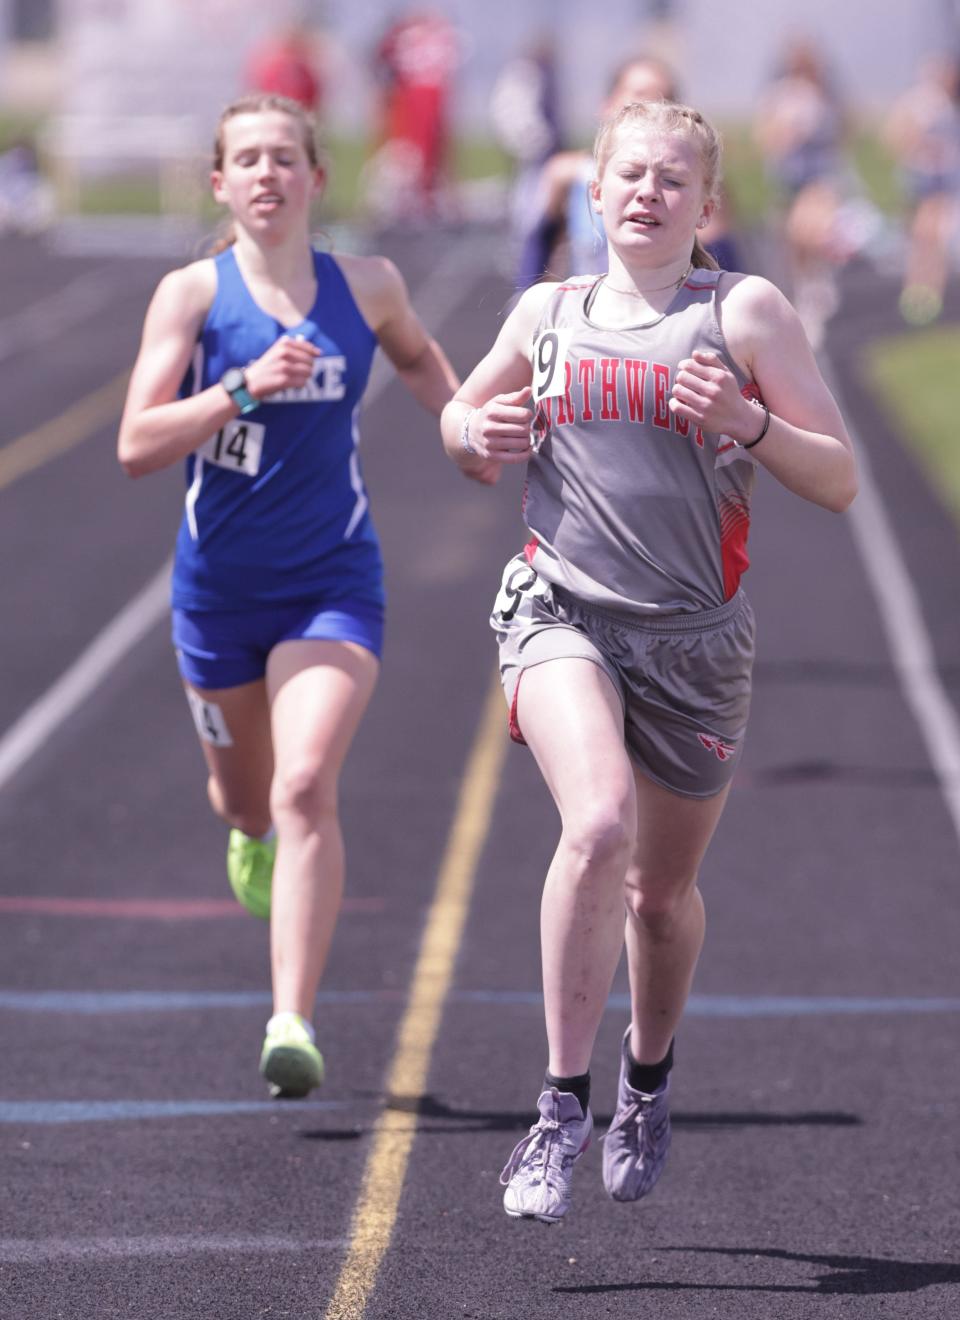 Northwest's Madelyn Begert (right) wins the girls 1,600-meter run ahead of Lake's Daniela Scheffler at Saturday's Stark County Track and Field Championships.